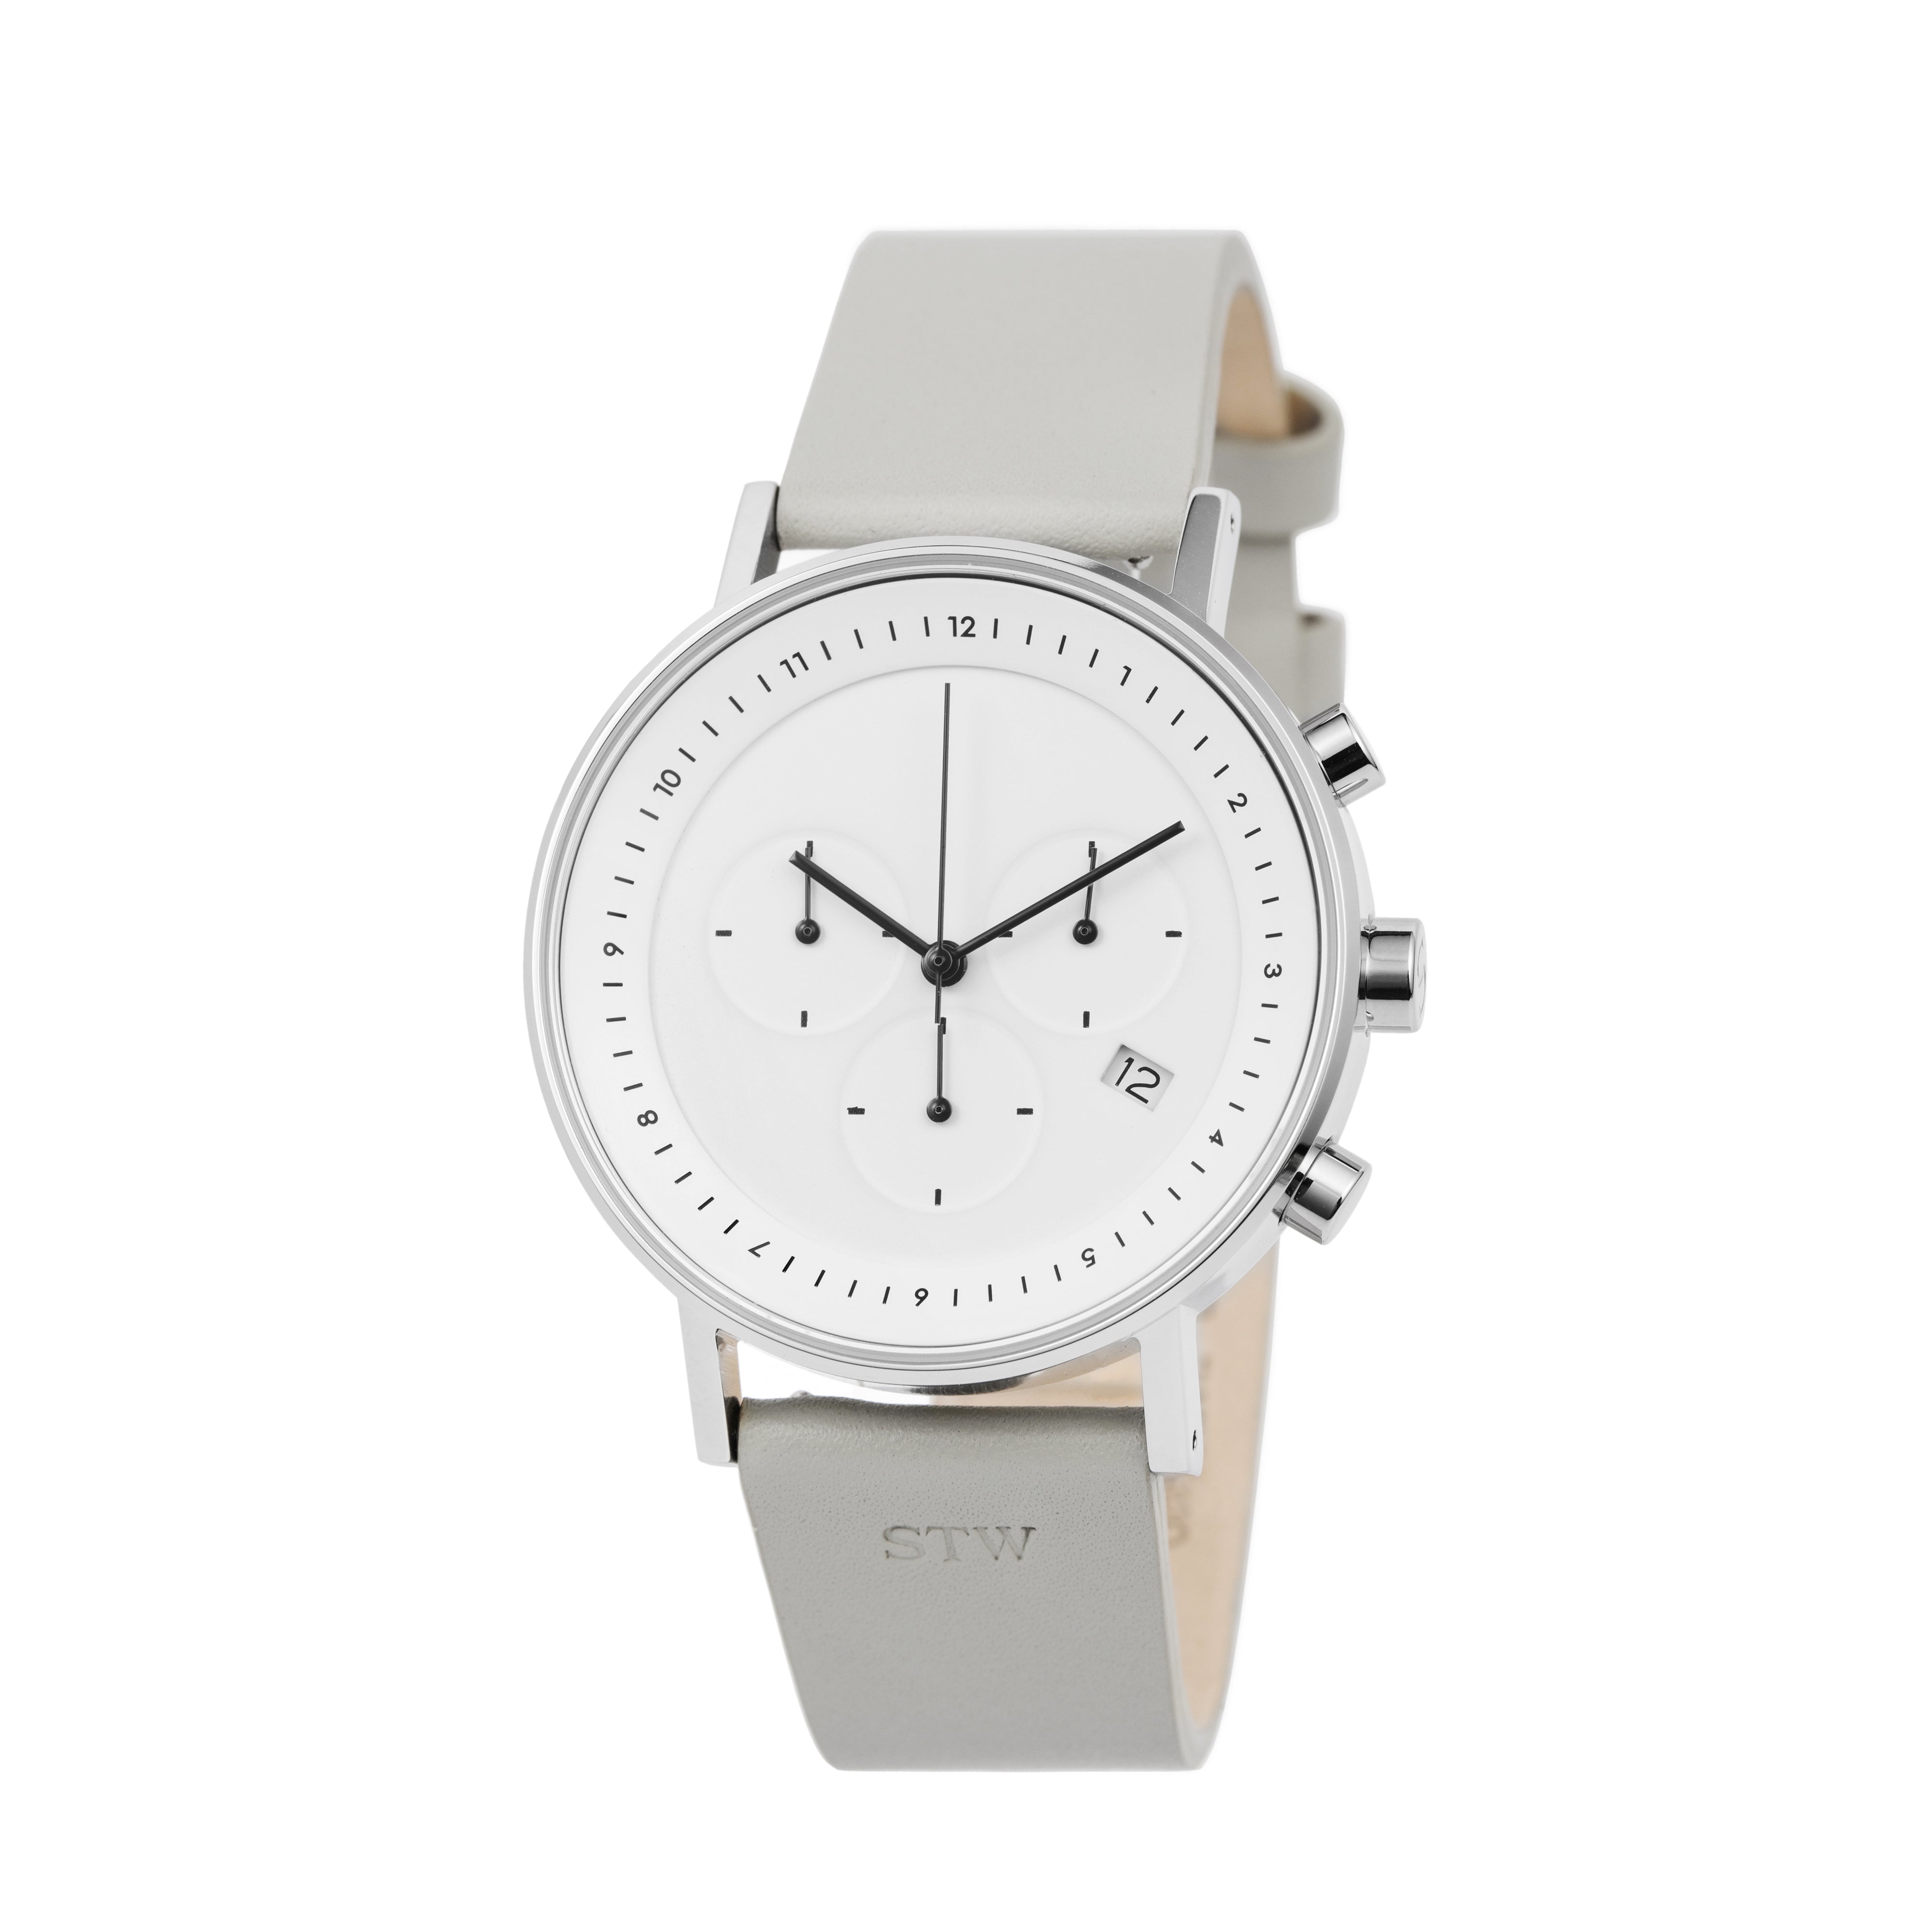 THE CHRONO - WHITE DIAL WITH GREY LEATHER STRAP WATCH